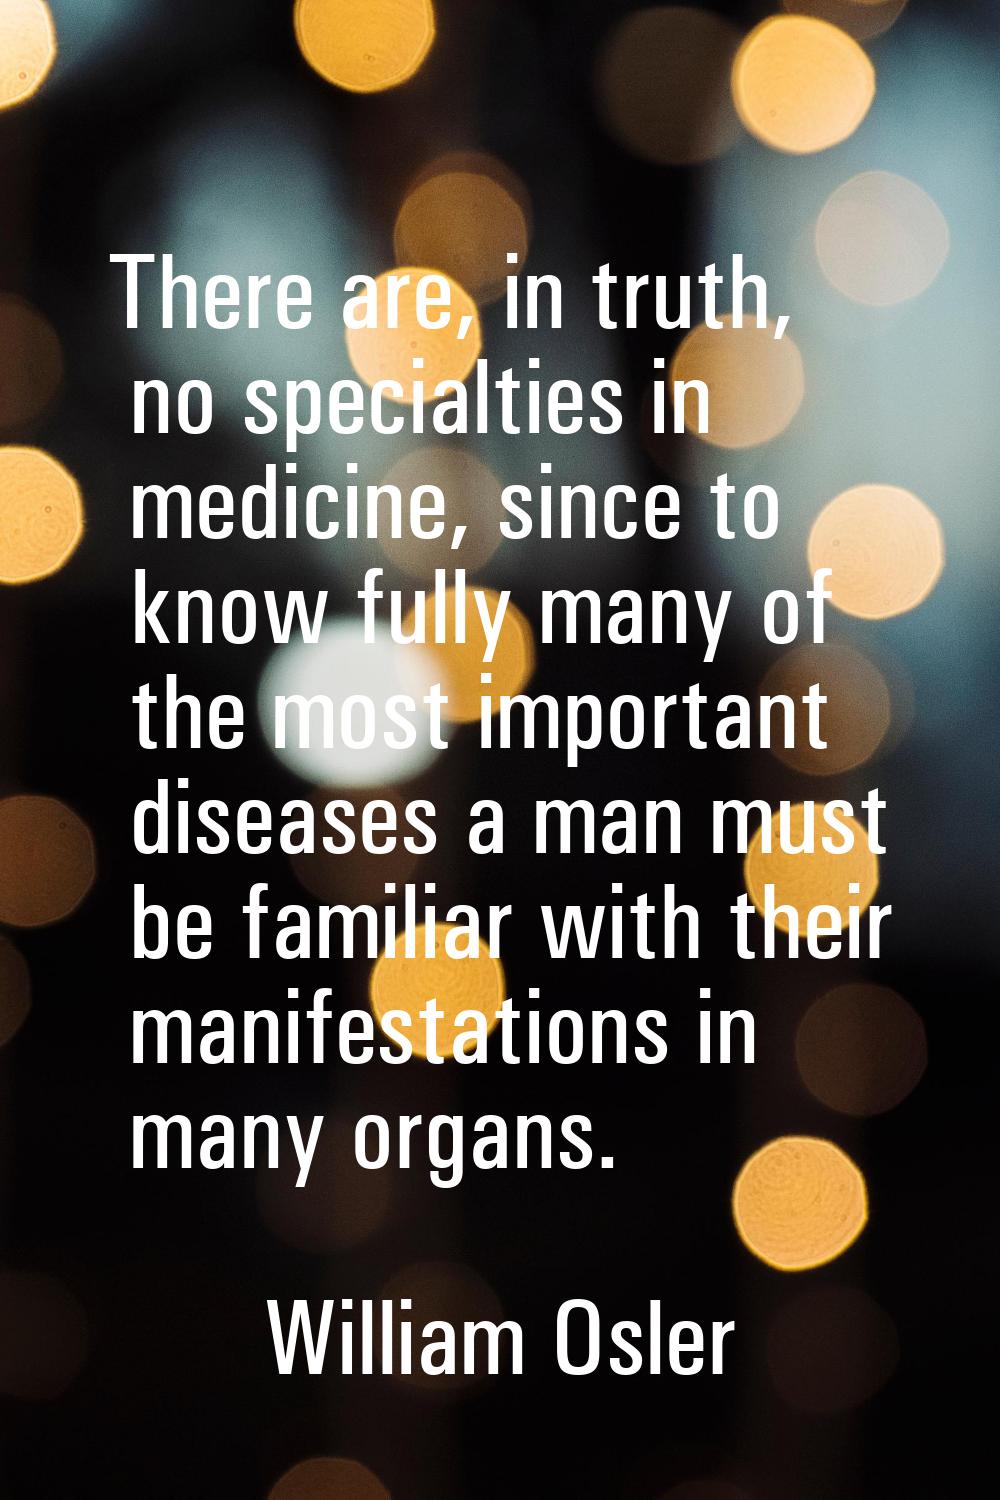 There are, in truth, no specialties in medicine, since to know fully many of the most important dis